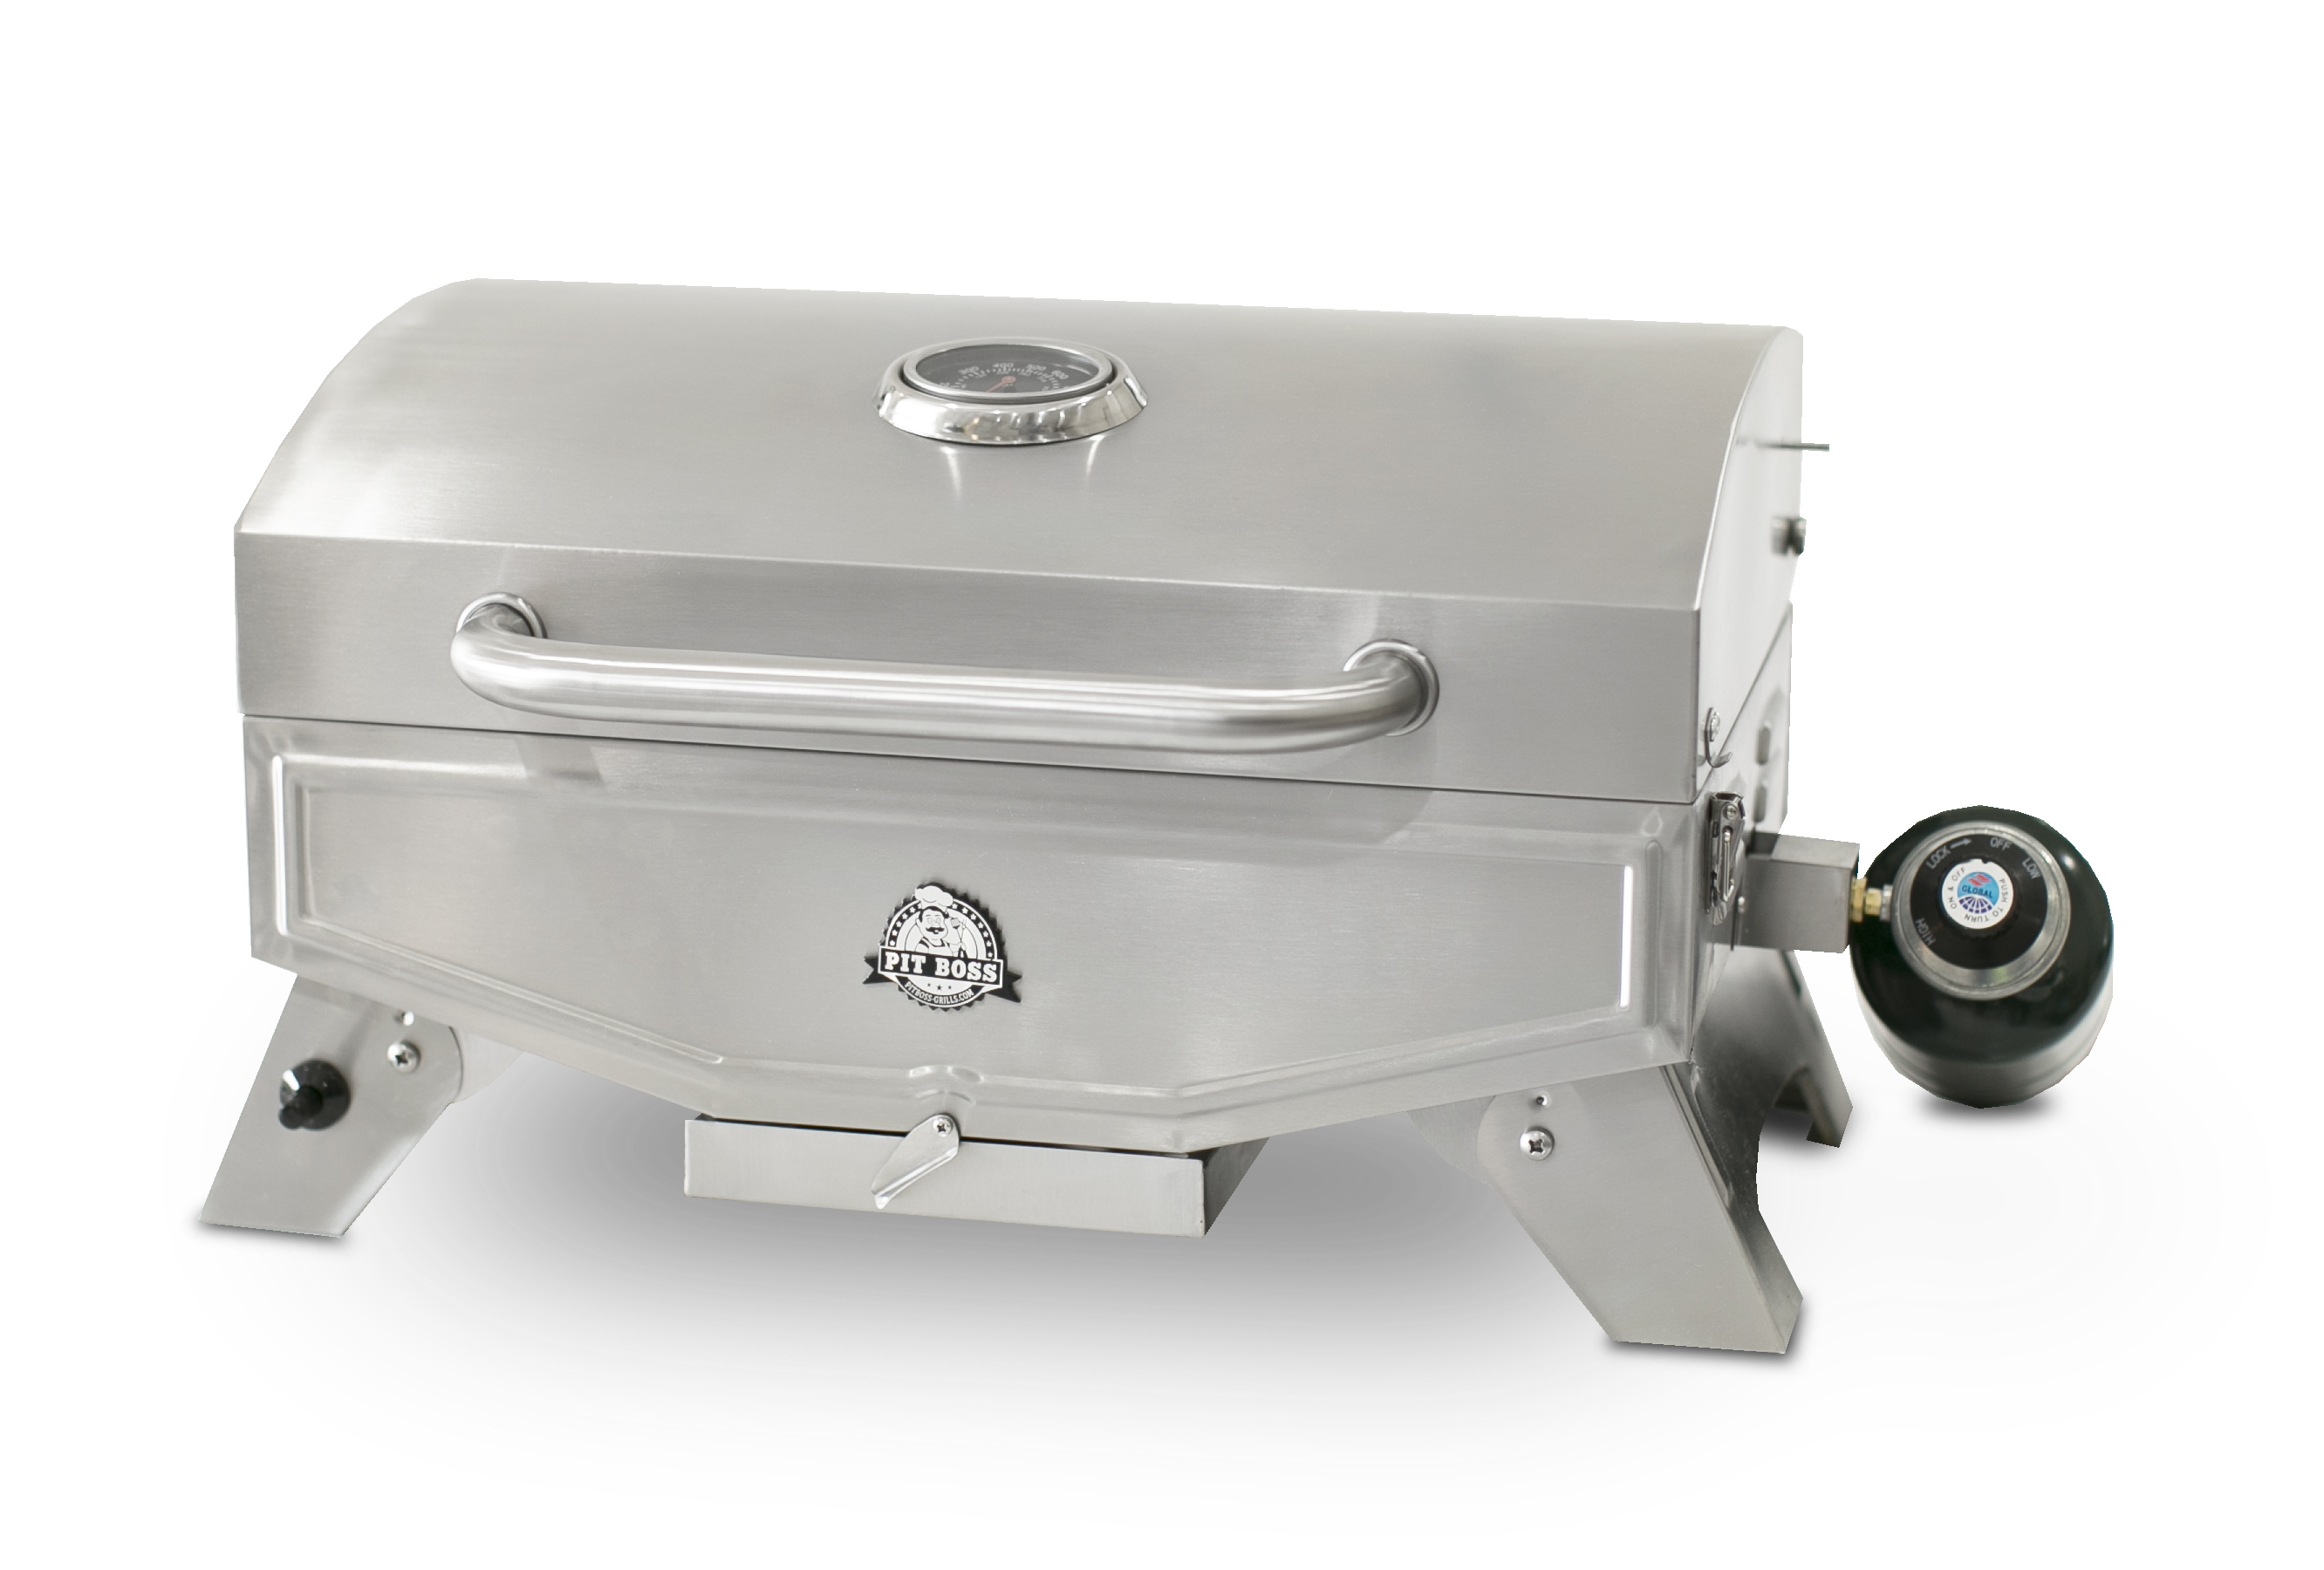 Pit Boss 1 Burner Silver Propane Portable Gas Grill - image 1 of 8